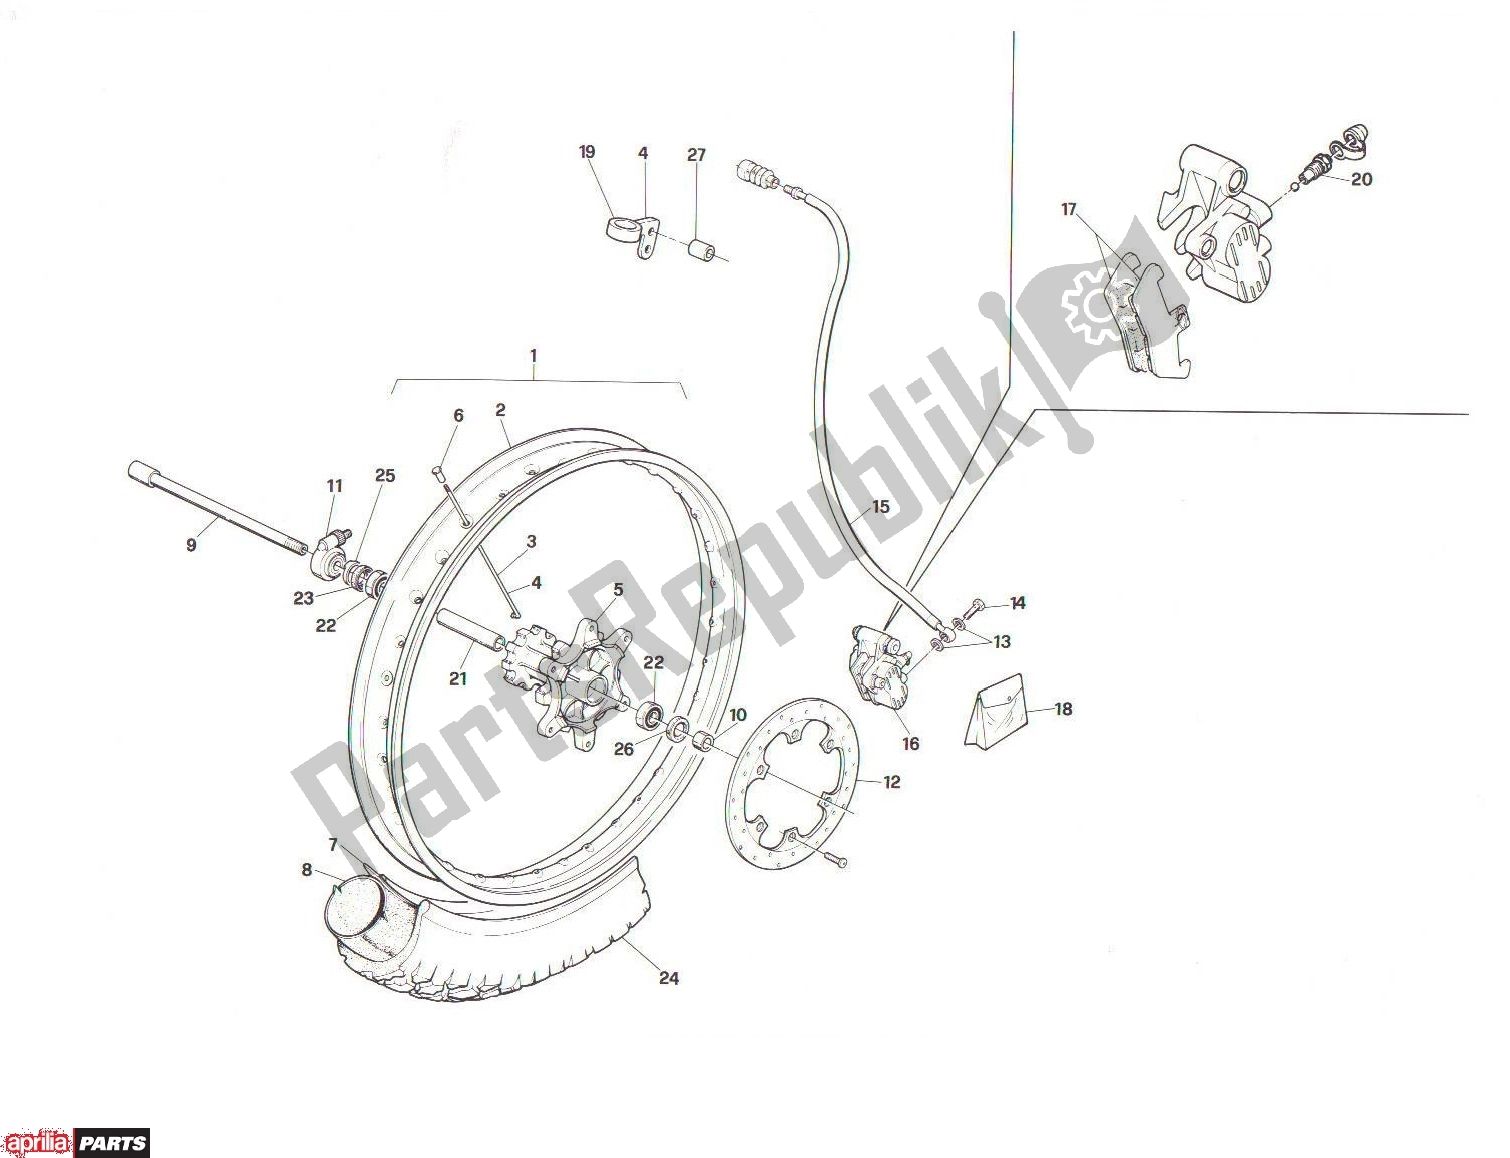 All parts for the Front Wheel of the Aprilia RX 104 125 1991